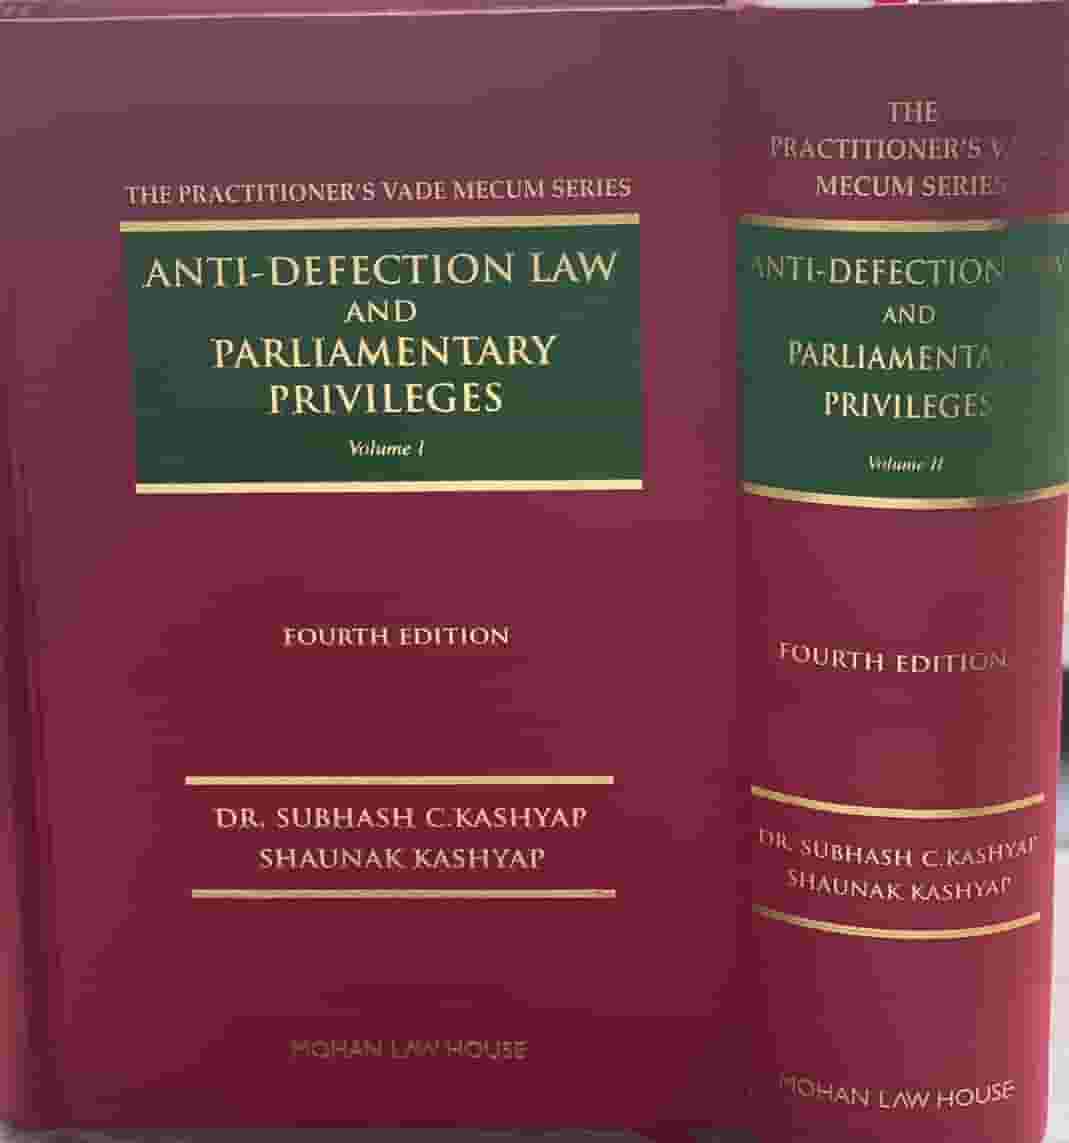 Anti Defection Law and Parliamentary Privleges  in 2 volumes by Subhash Kashyap and Shaunak Kashyap 